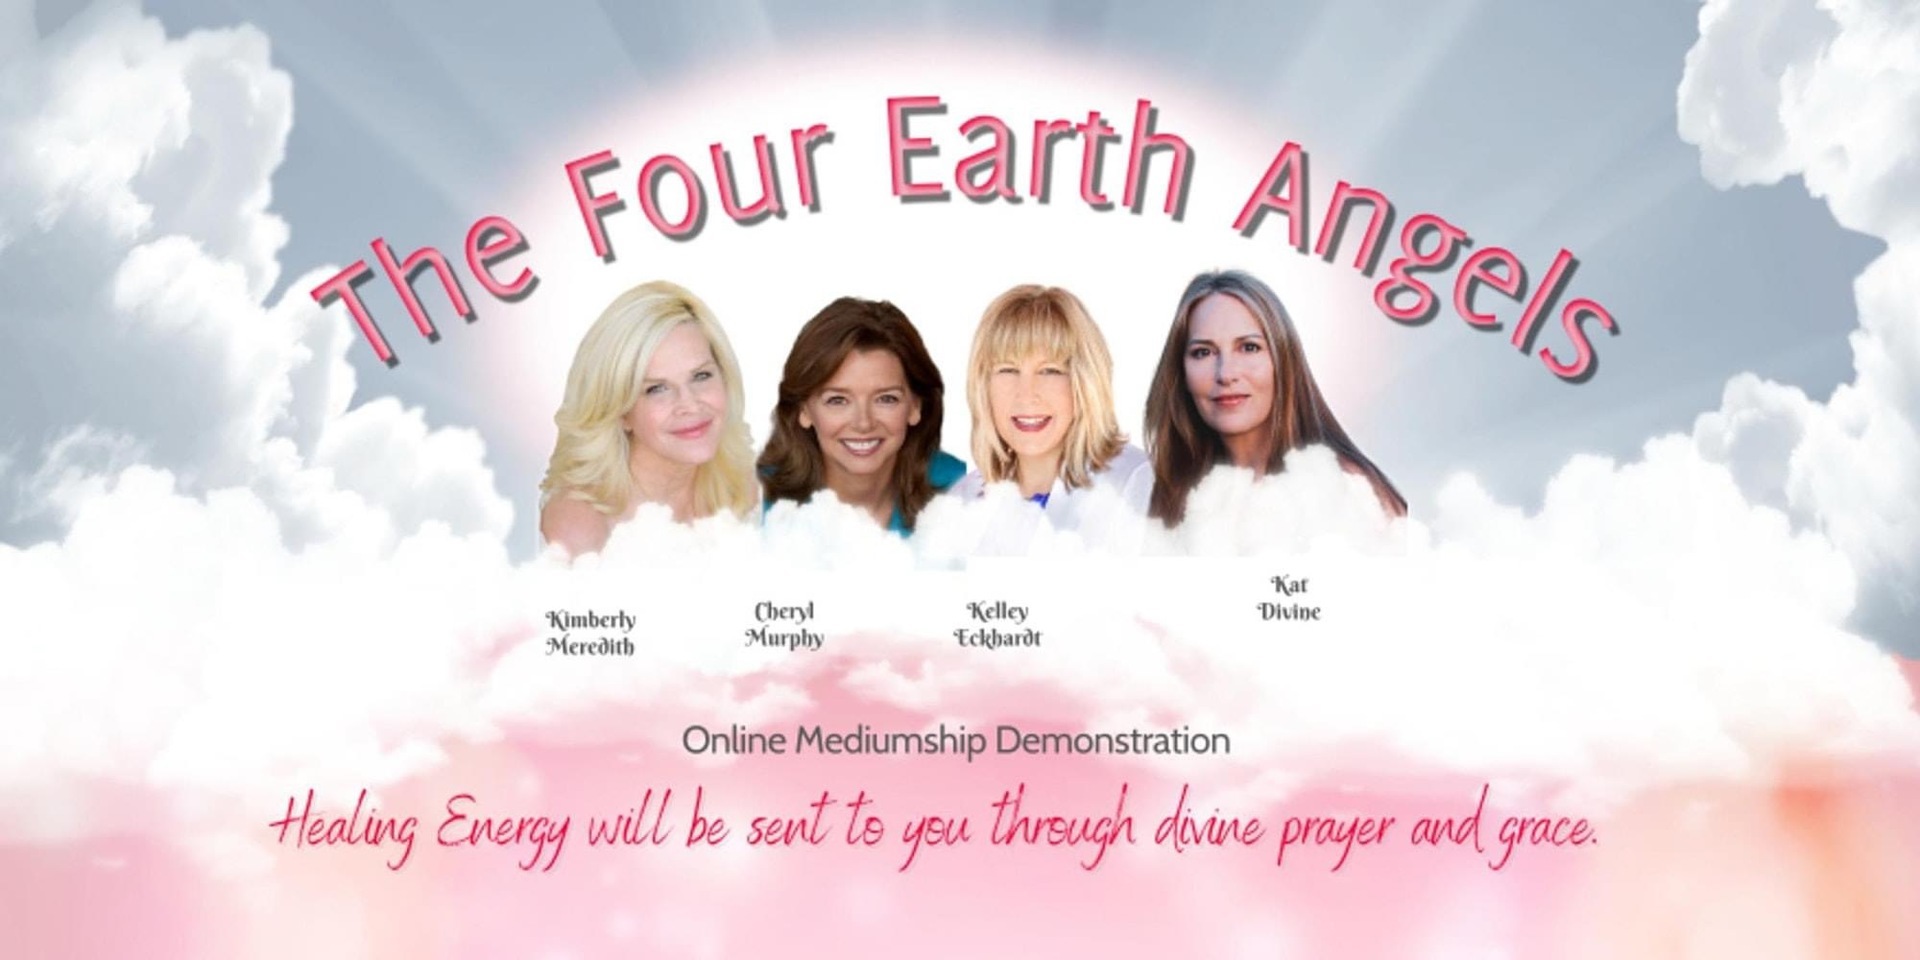 The Four Earth Angels Spirit Mediumship and Medical Intuitive Demonstration Love Never Dies October 23, Online Event